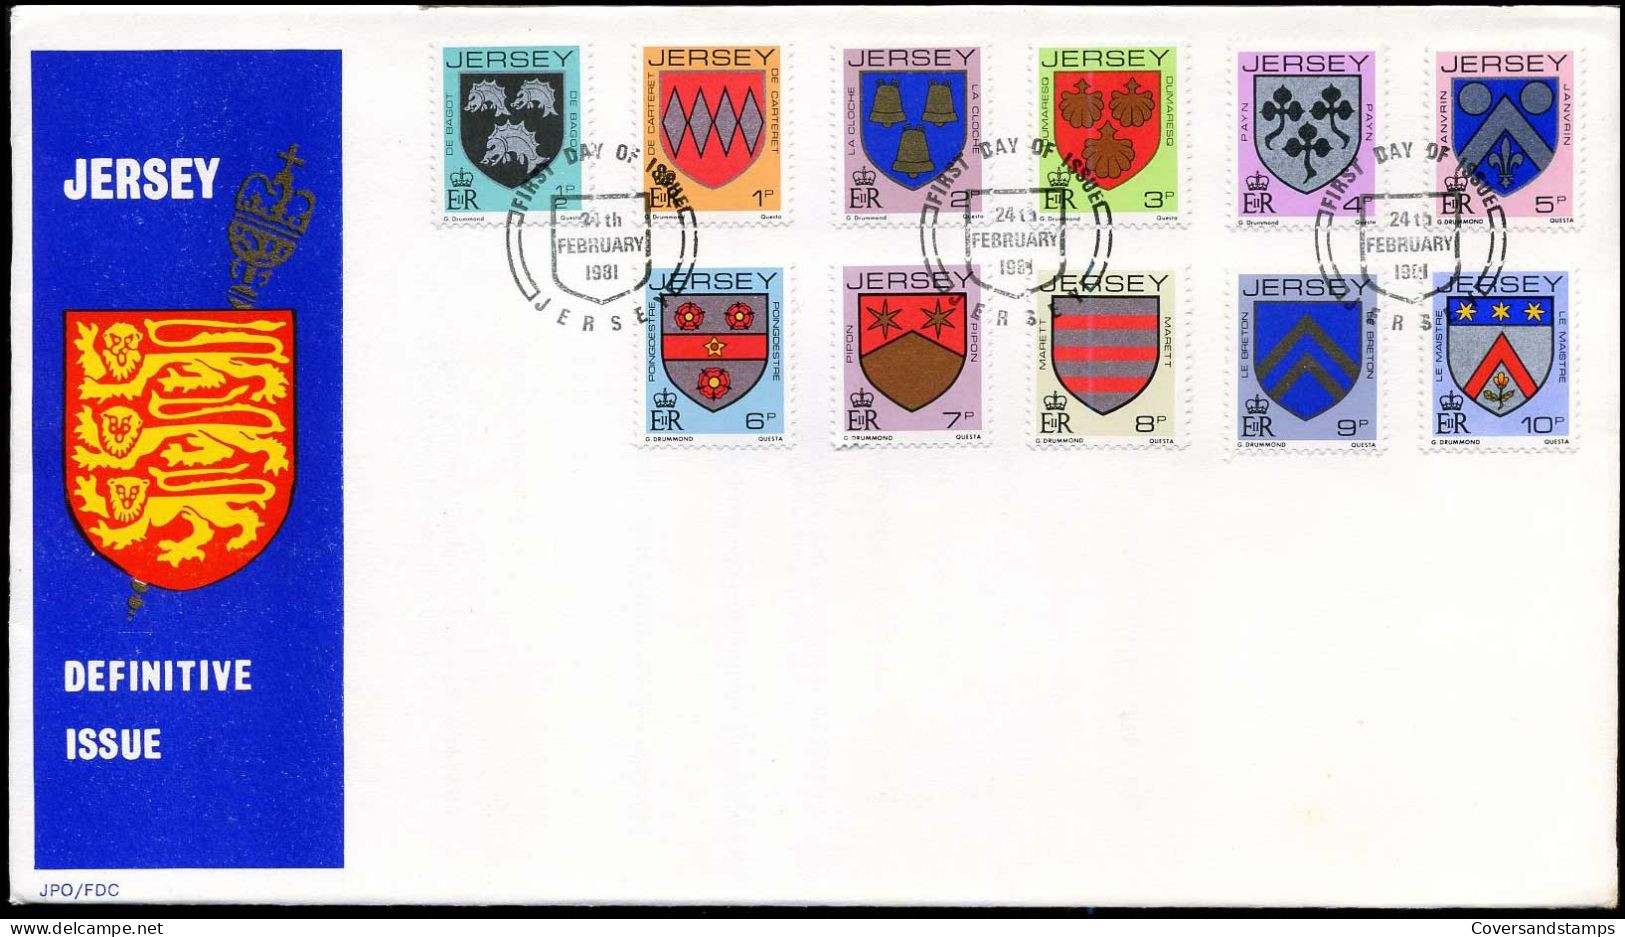 Jersey - FDC - Definitive Issue - Jersey